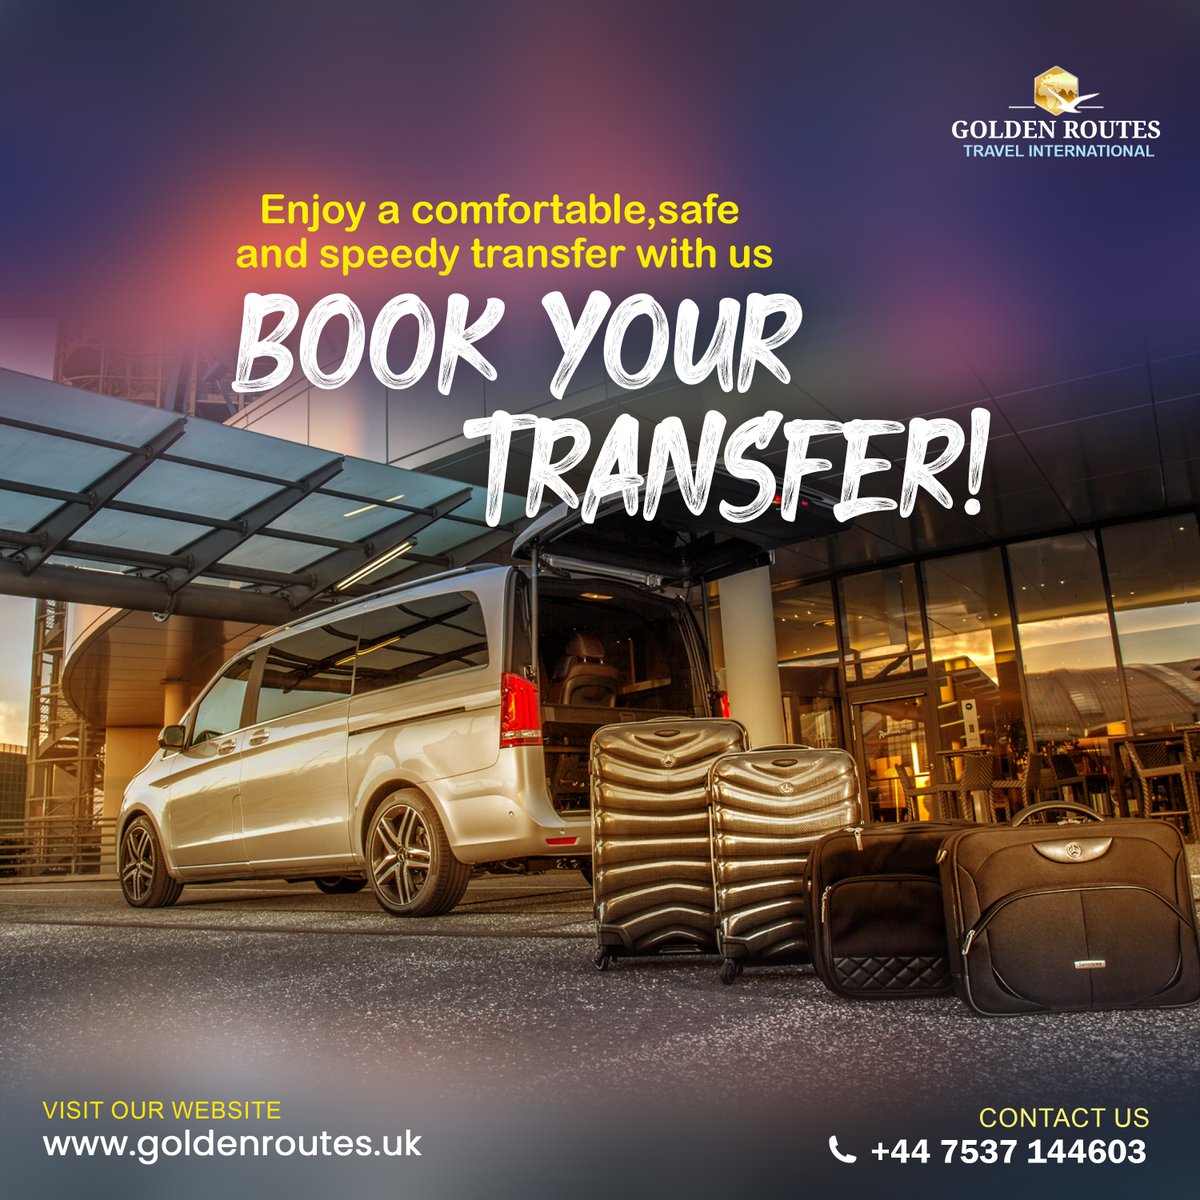 Enjoy a comfortable, safe and speedy transfer with us
Book your transfer
office@goldenroutes.uk
+41 76 482 77 66
#airporttransfers #airporttransfer #chauffeurservice #airport #travel #chauffeur #limousine #vip #limoservice #taxi #taxiservice #luxurytravel #transfer #privatedriver